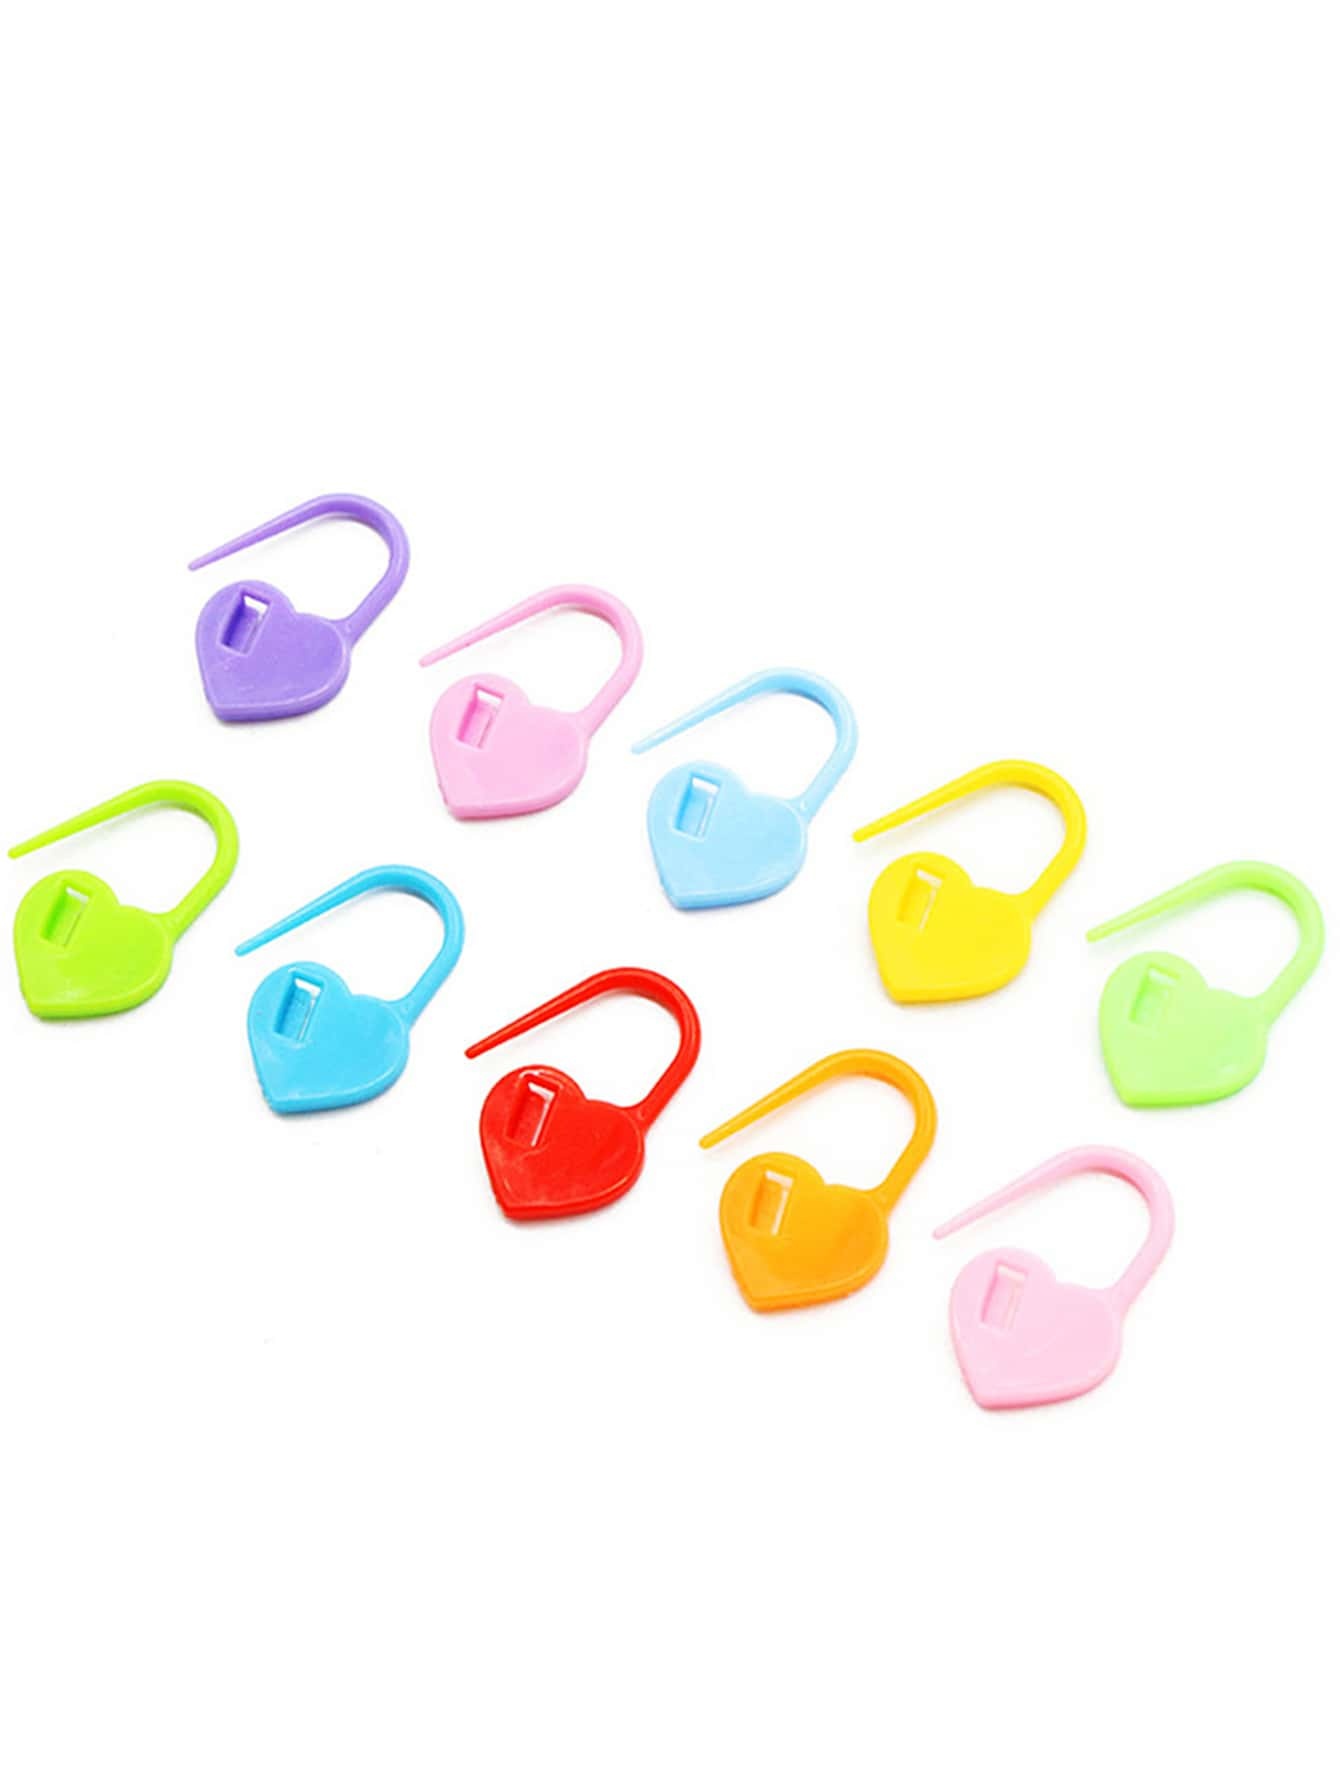 50pcs Heart Design Random Color Buckle, Plastic Creative Macaron DIY Knitting Marker For Sewing Clothing